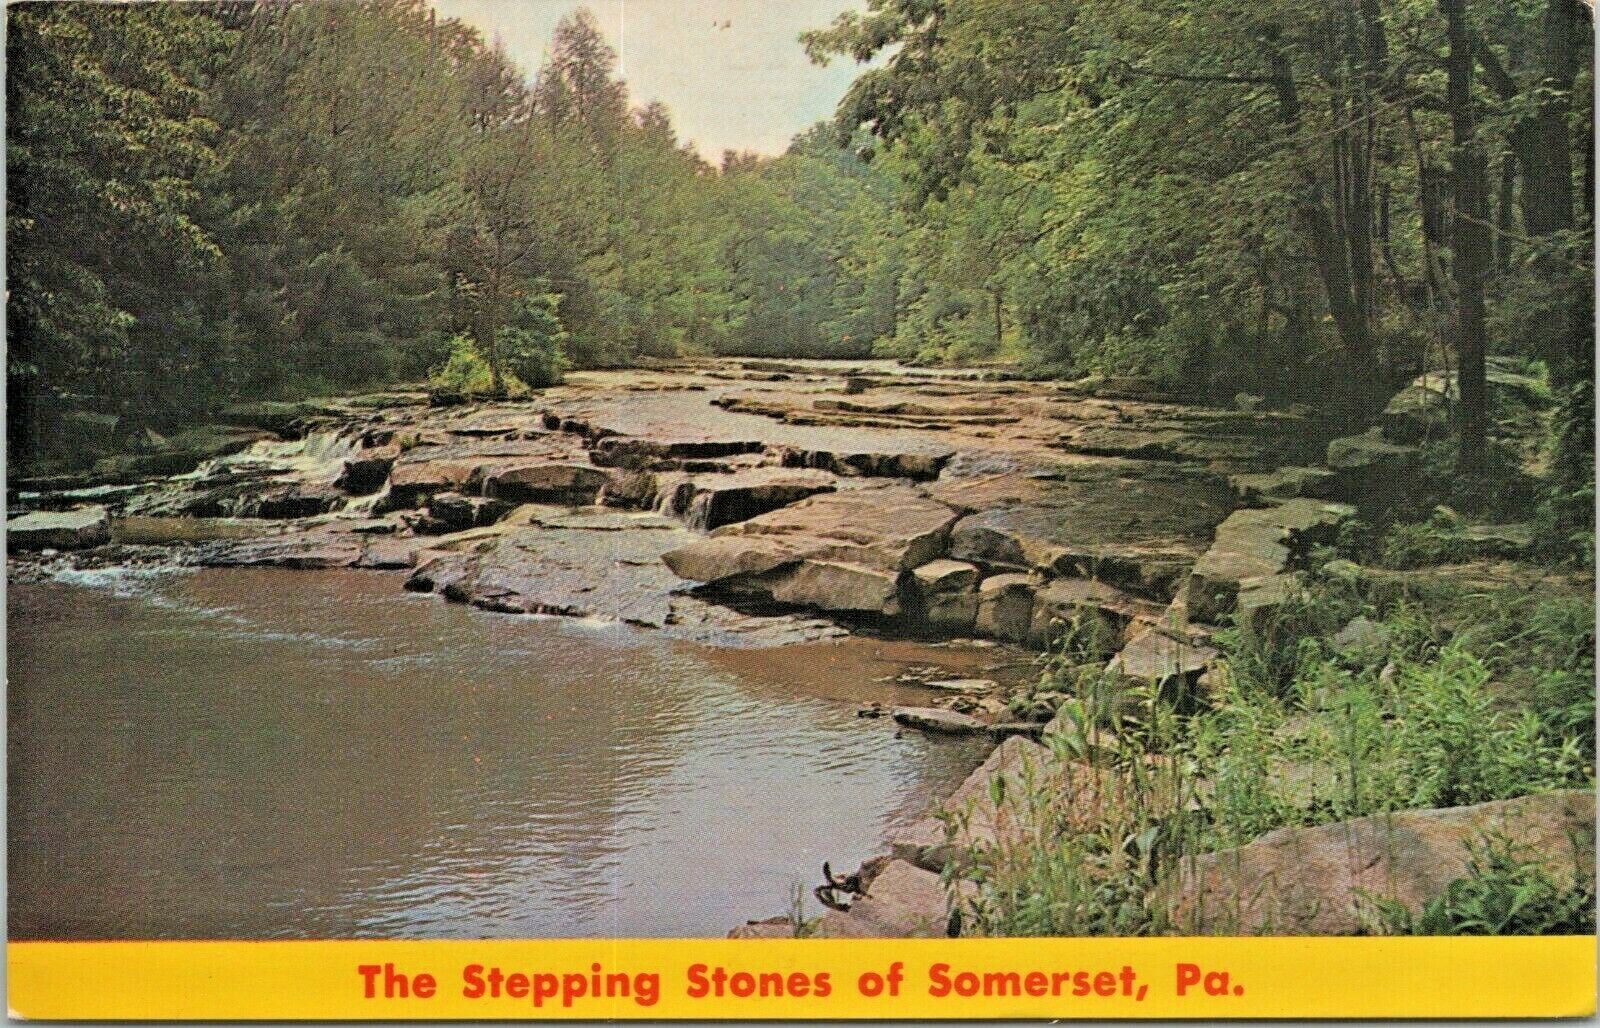 Stepping Stones of Somerset Pennsylvania Landscape View 1970 Postcard - Posted